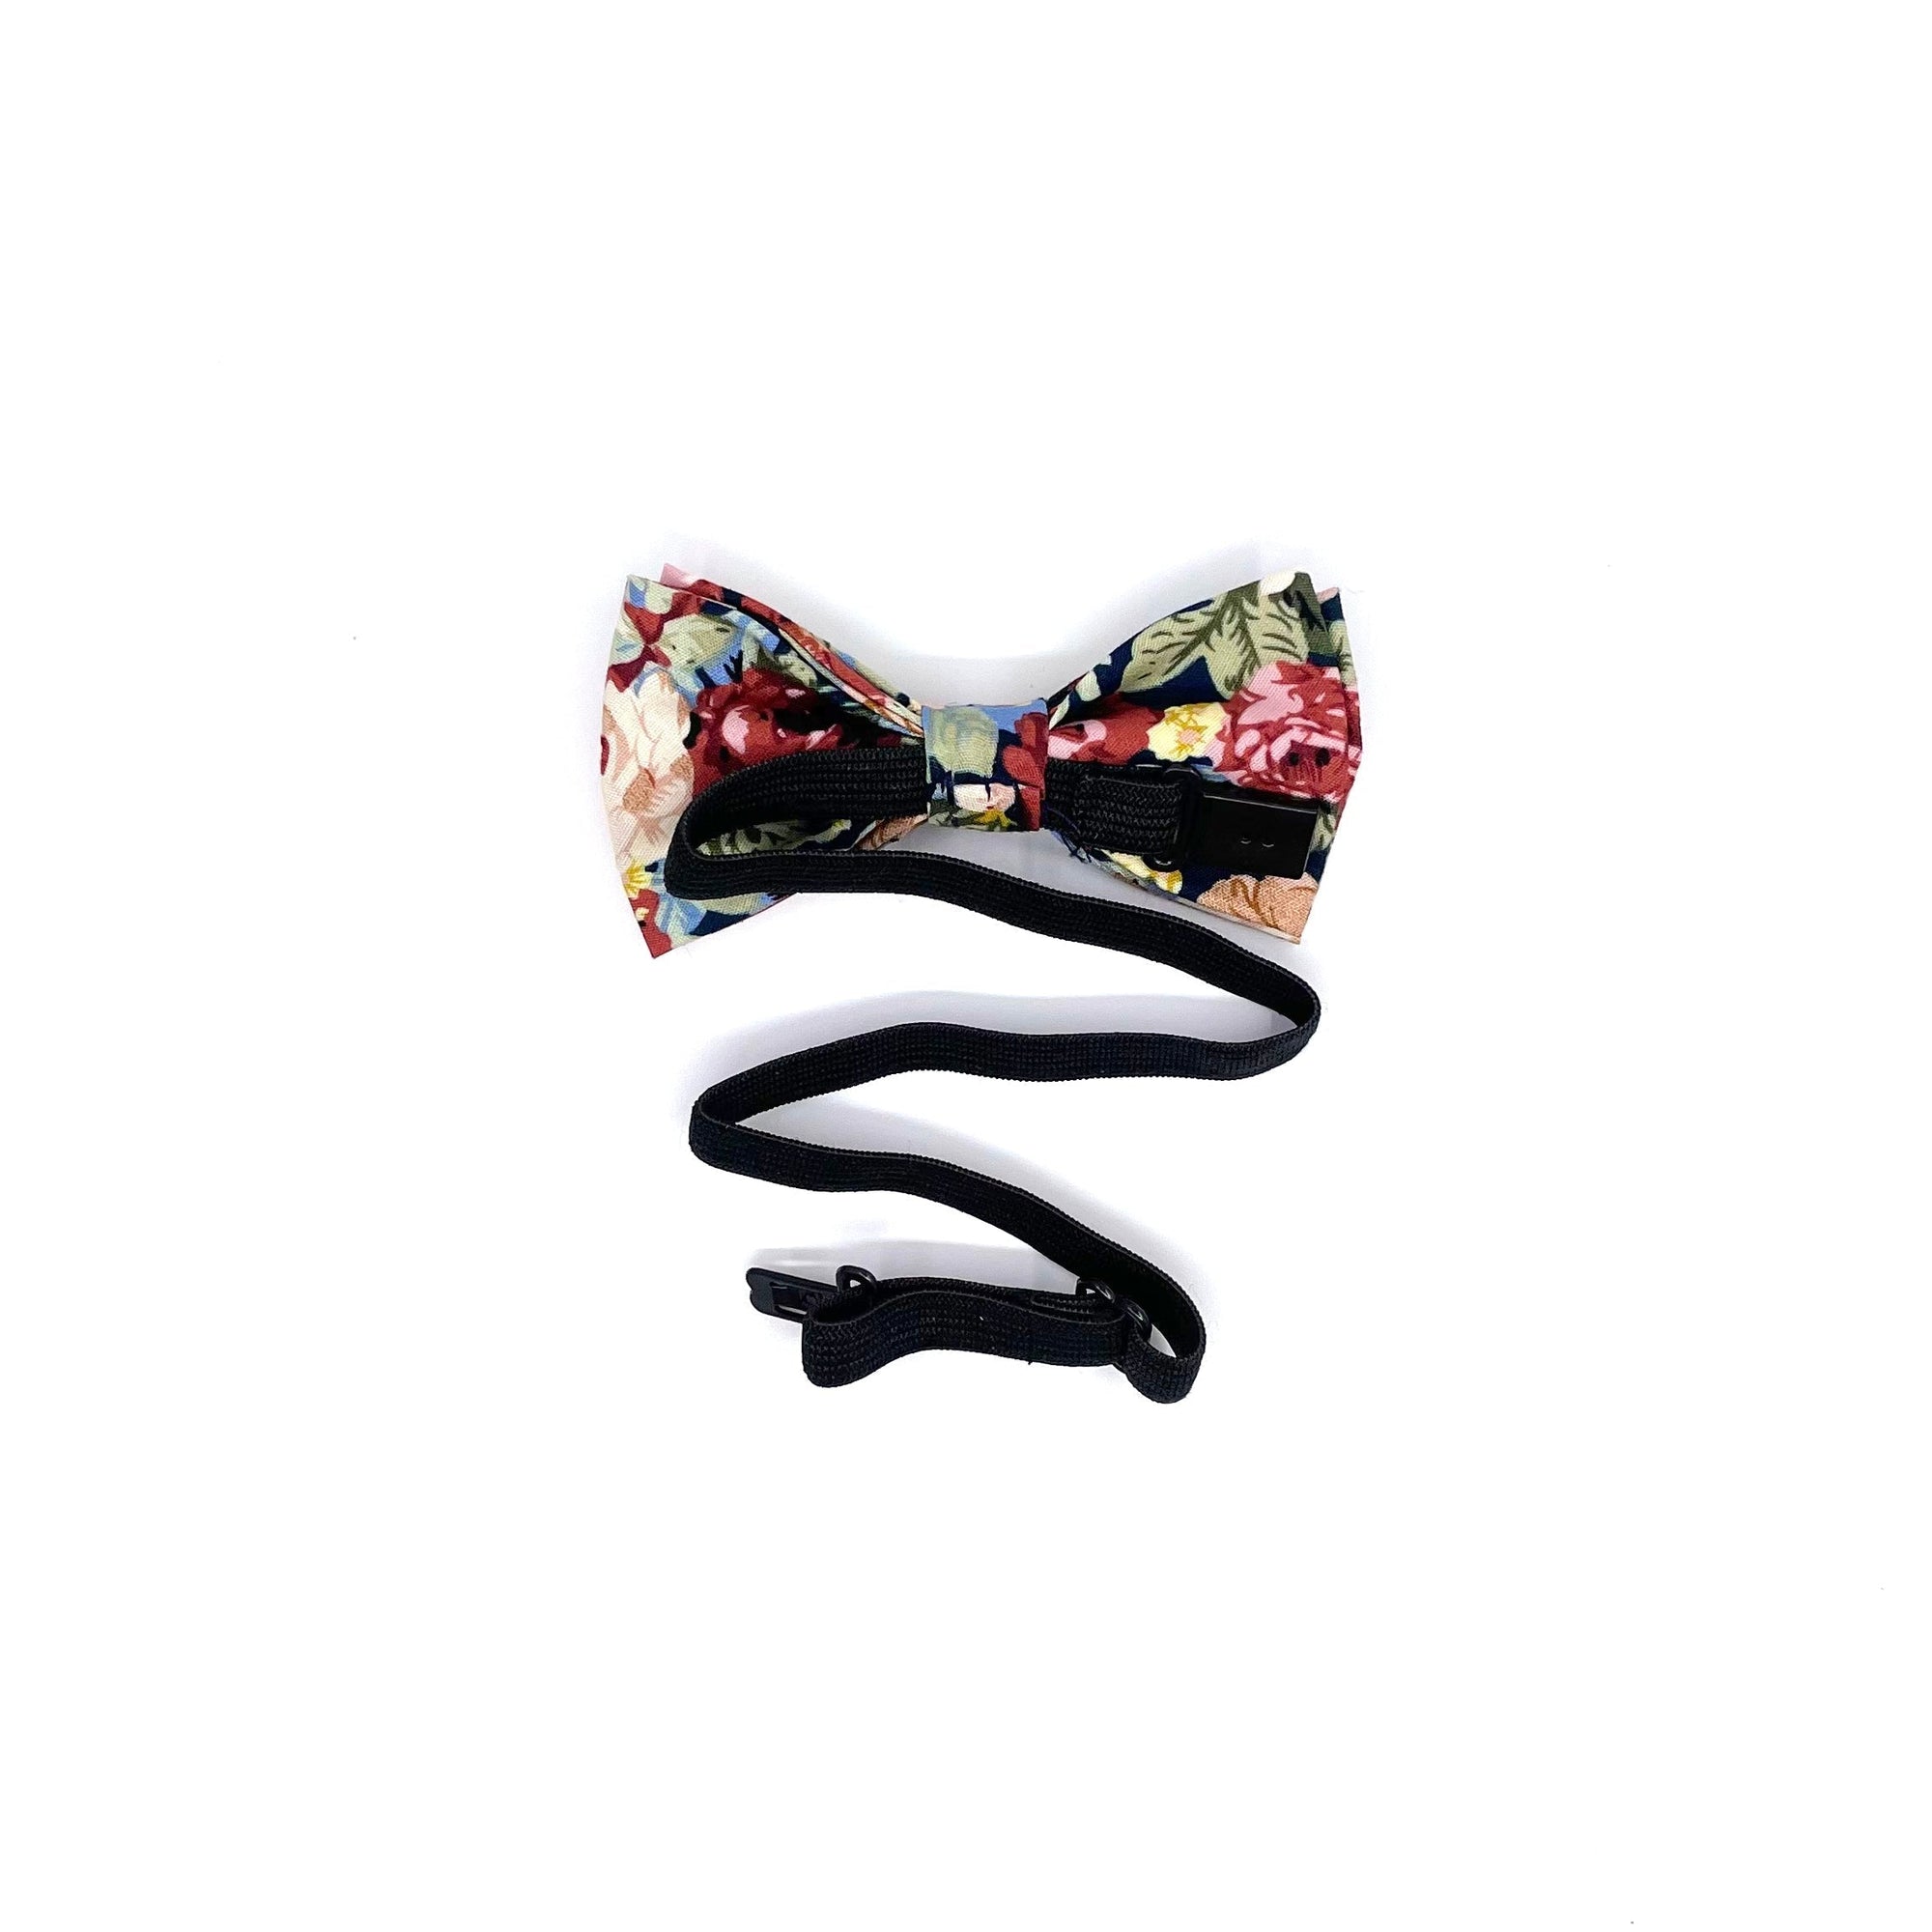 Blue Kids Floral Bow Tie (Pretied) by Mytieshop - EVANDER-Blue Kids Floral Bow Tie Color: blue Strap is adjustablePre-Tied bowtieBow Tie 10.5 * 6CMFor toddlers ages 0- Great for Prom Dinners Interviews Photo shoots Photo sessions Dates Wedding Attendant Ring Bearers Evander Kids Floral Bow tie for kids. Fits toddlers and babies. Evabder baby ow tie toddler bow tie floral for wedding and events groom groomsmen flower bow tie mytieshop ring bearer page boy bow tie white bow tie white and blue tie 